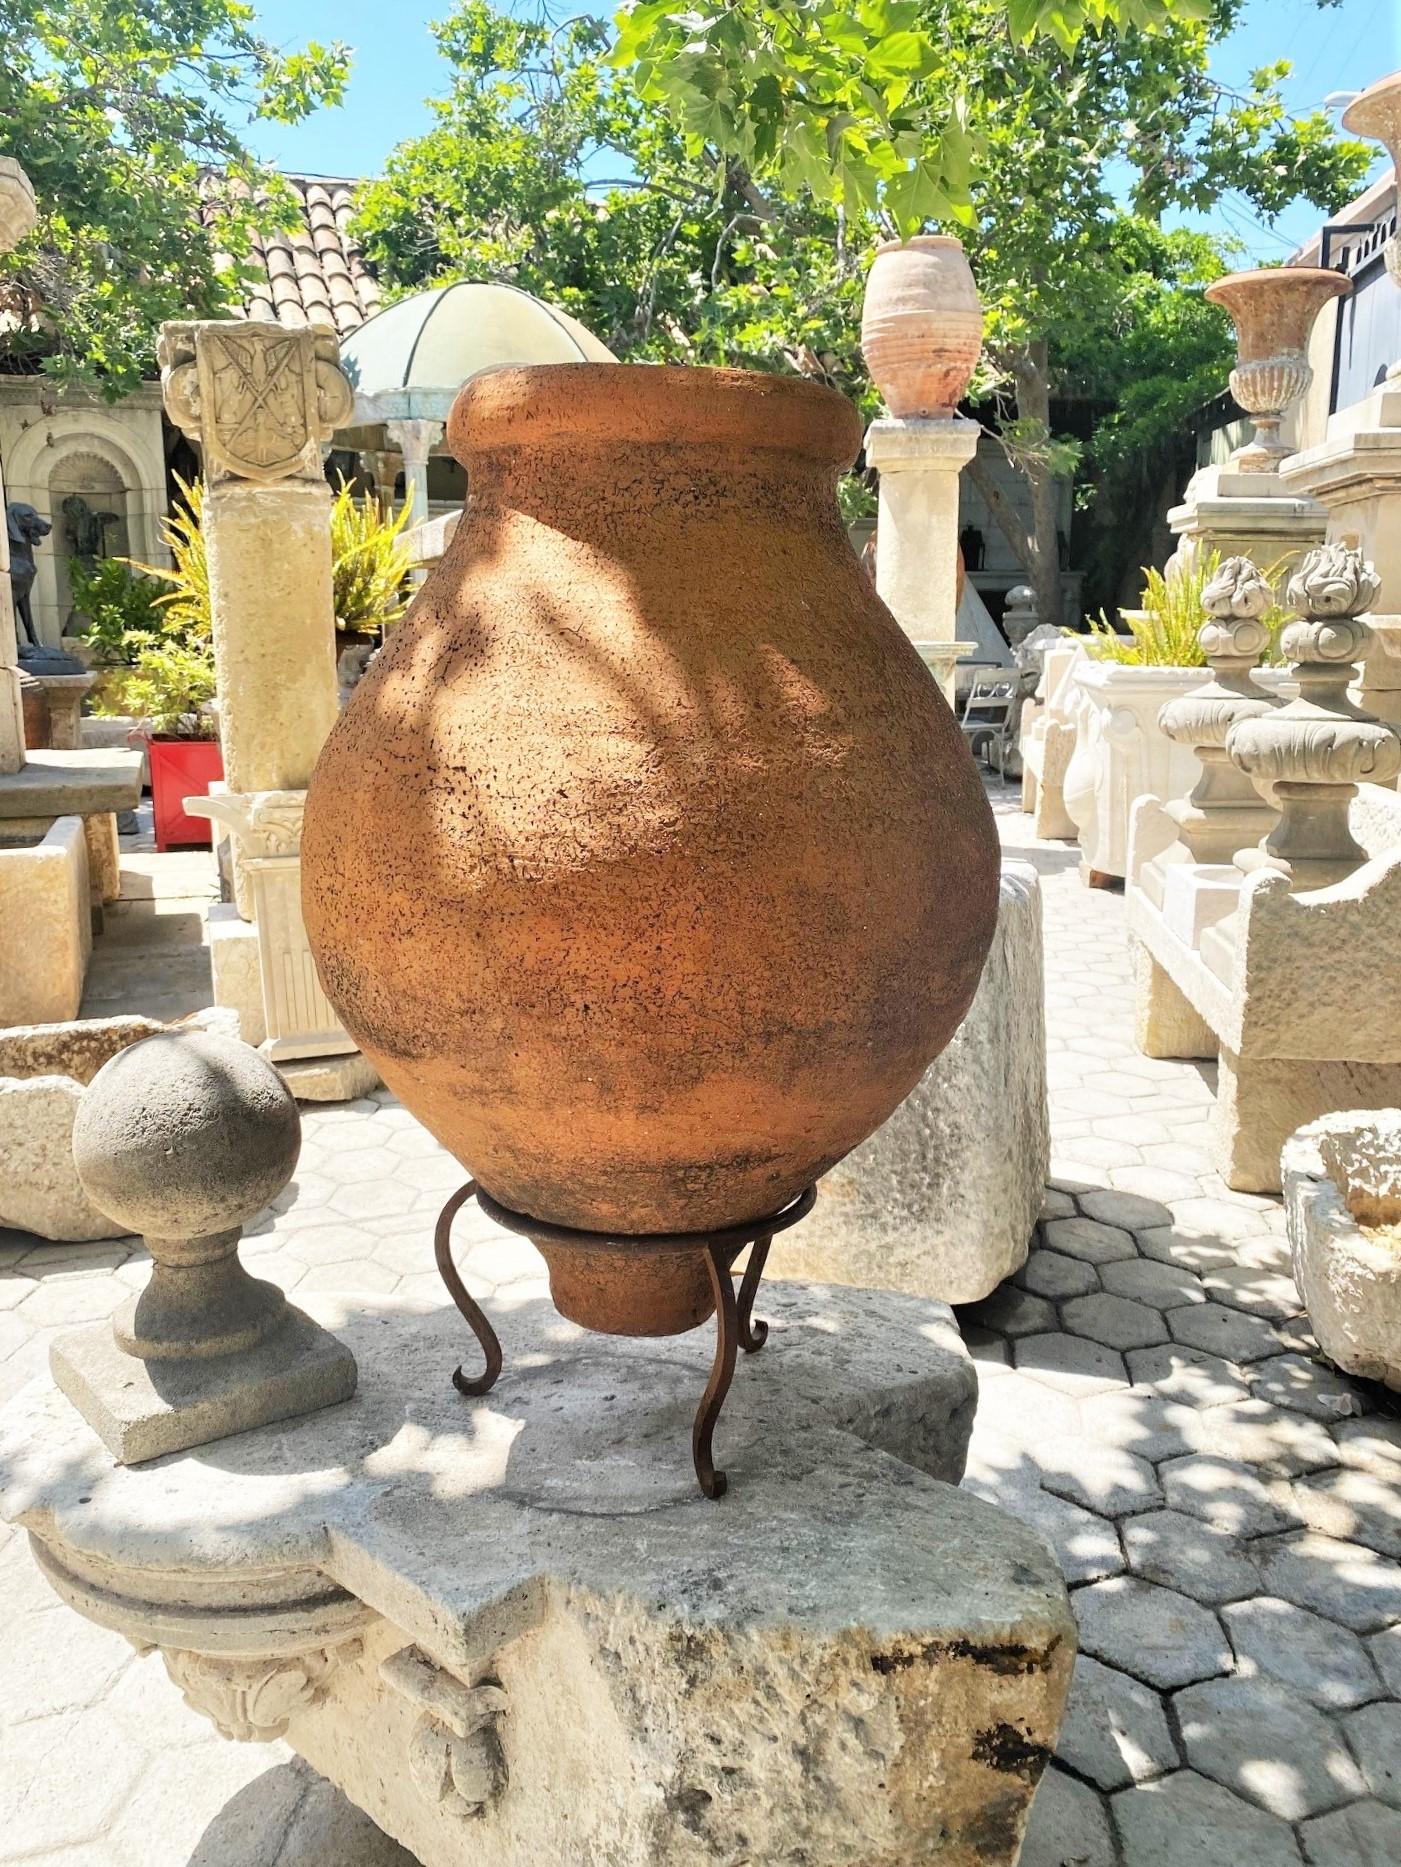 Outstanding 19th century Spanish olive oil jar in beautiful terracotta. A beautiful accent piece for any interior or exterior. Terracotta vessels once used to hold olives and olive oil features a rounded lip at the top, with a bulbous center which